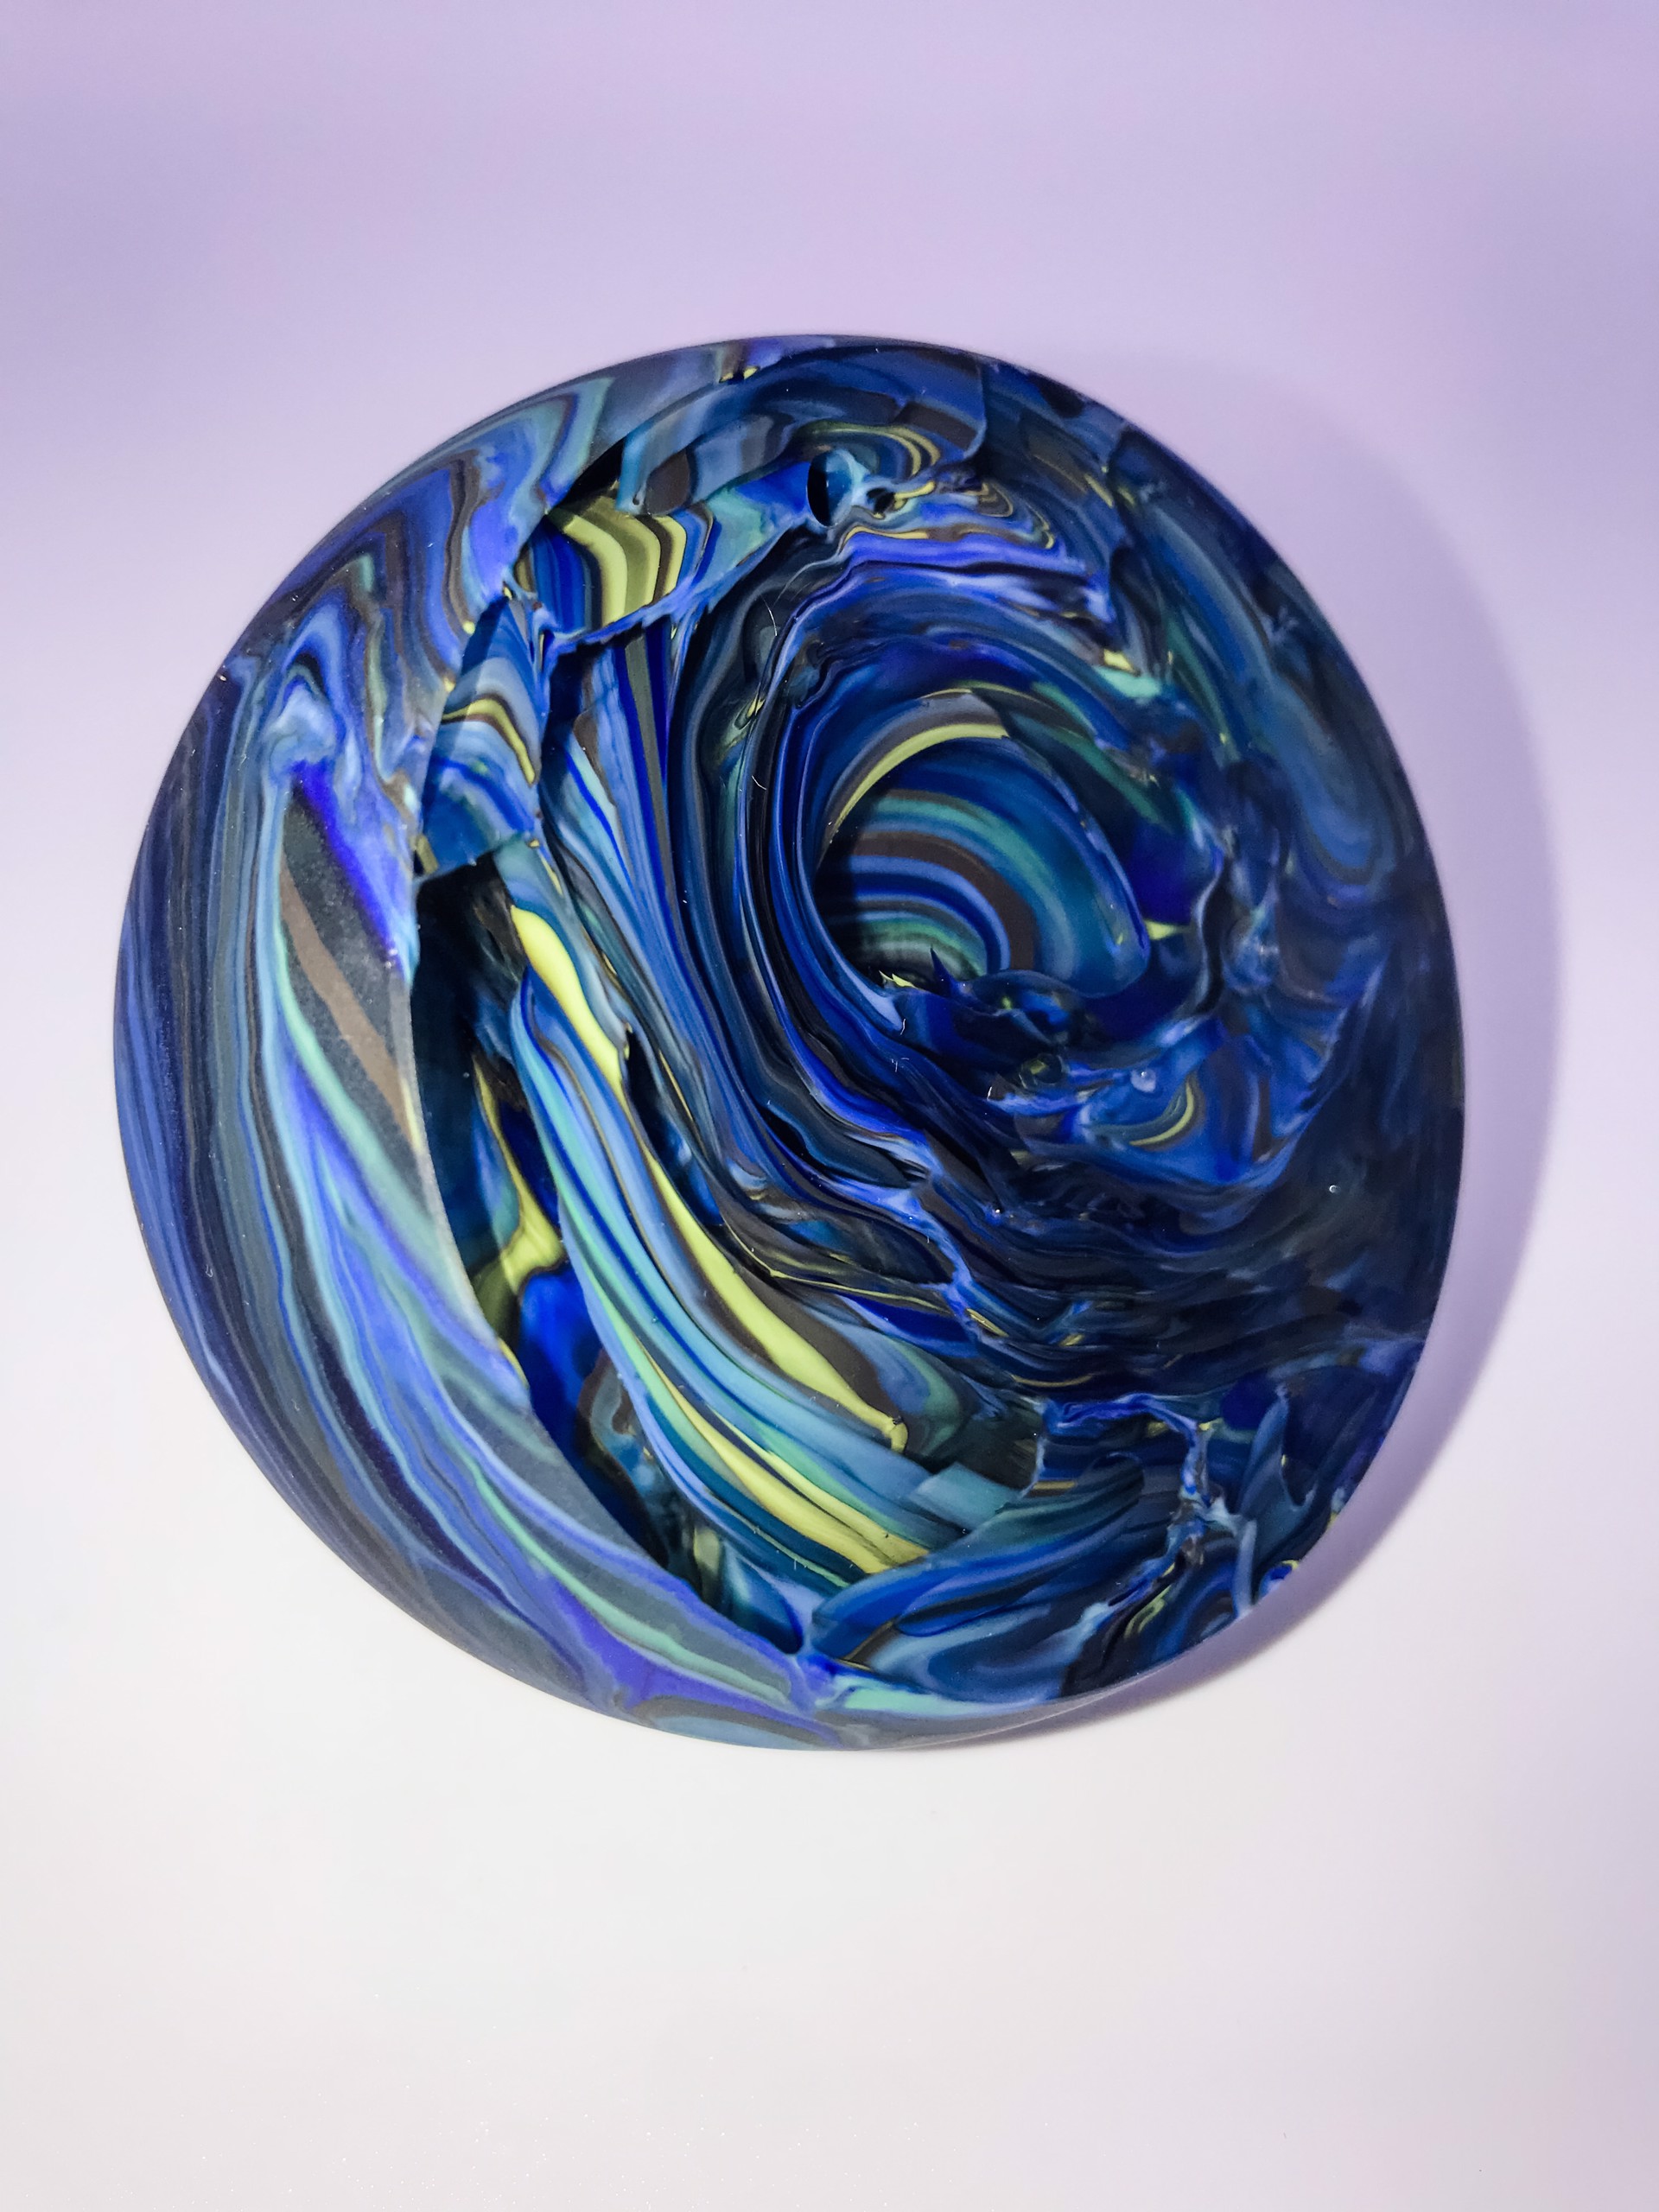 Cut and Polished Agate by Fred Kaemmer